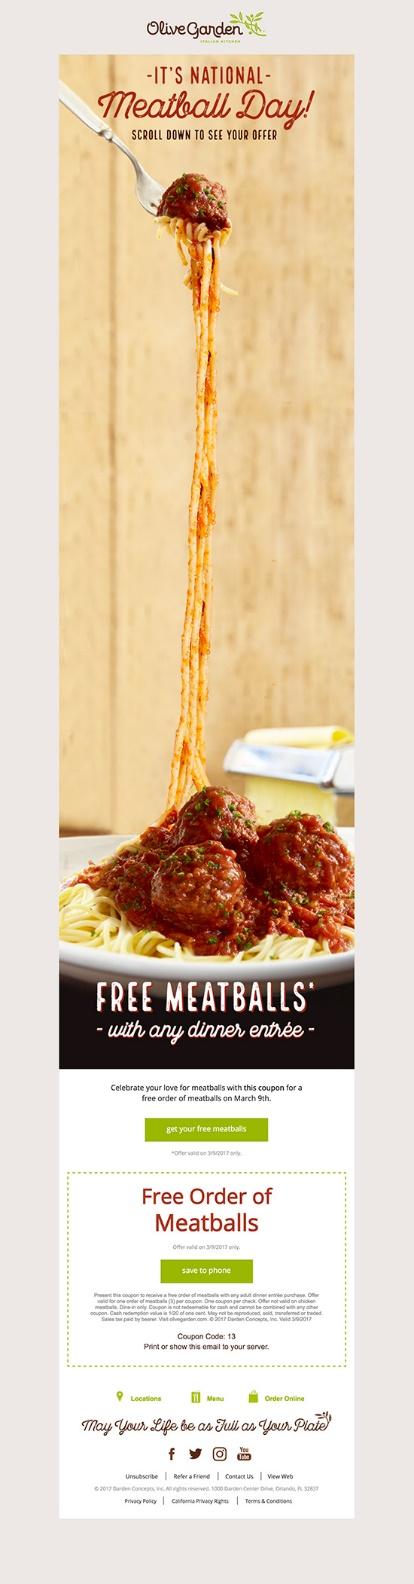 Let’s be real: It’s pretty hard to resist a fresh, steaming bowl of pasta. Olive Garden capitalizes on that with this gorgeous restaurant email design that keeps your eyes interested and fingers scrolling all the way to “Get Your Free Meatballs.”